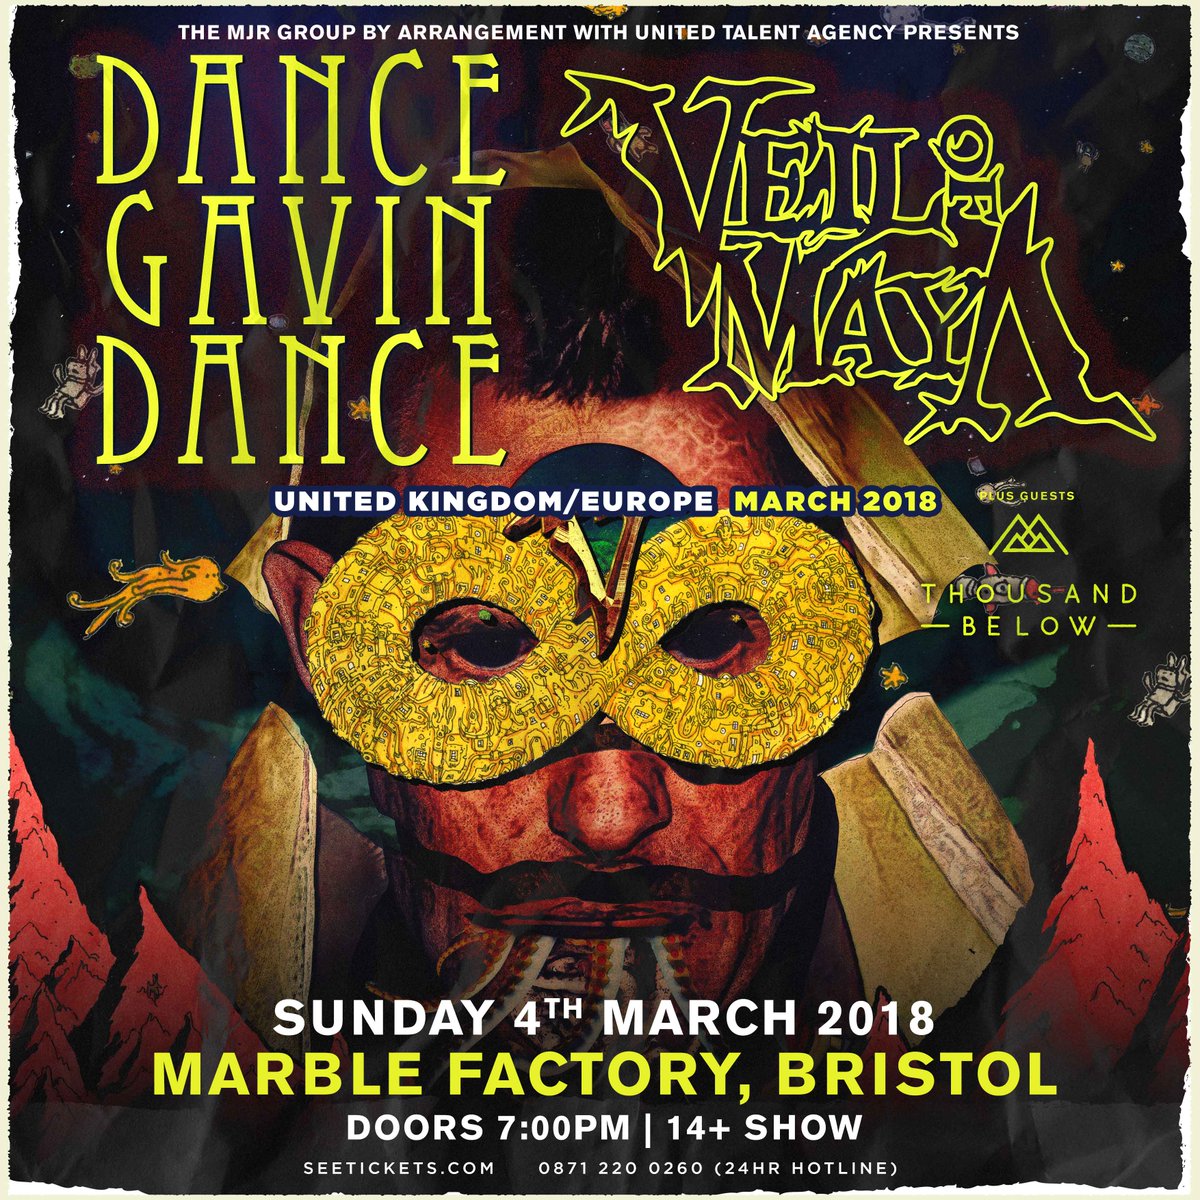 BRISTOL - @DGDtheband are coming to @MarbleFactoryUK with @veilofmayaband this Sunday! Tickets are close to selling out! Come party: bit.ly/DGDVoM